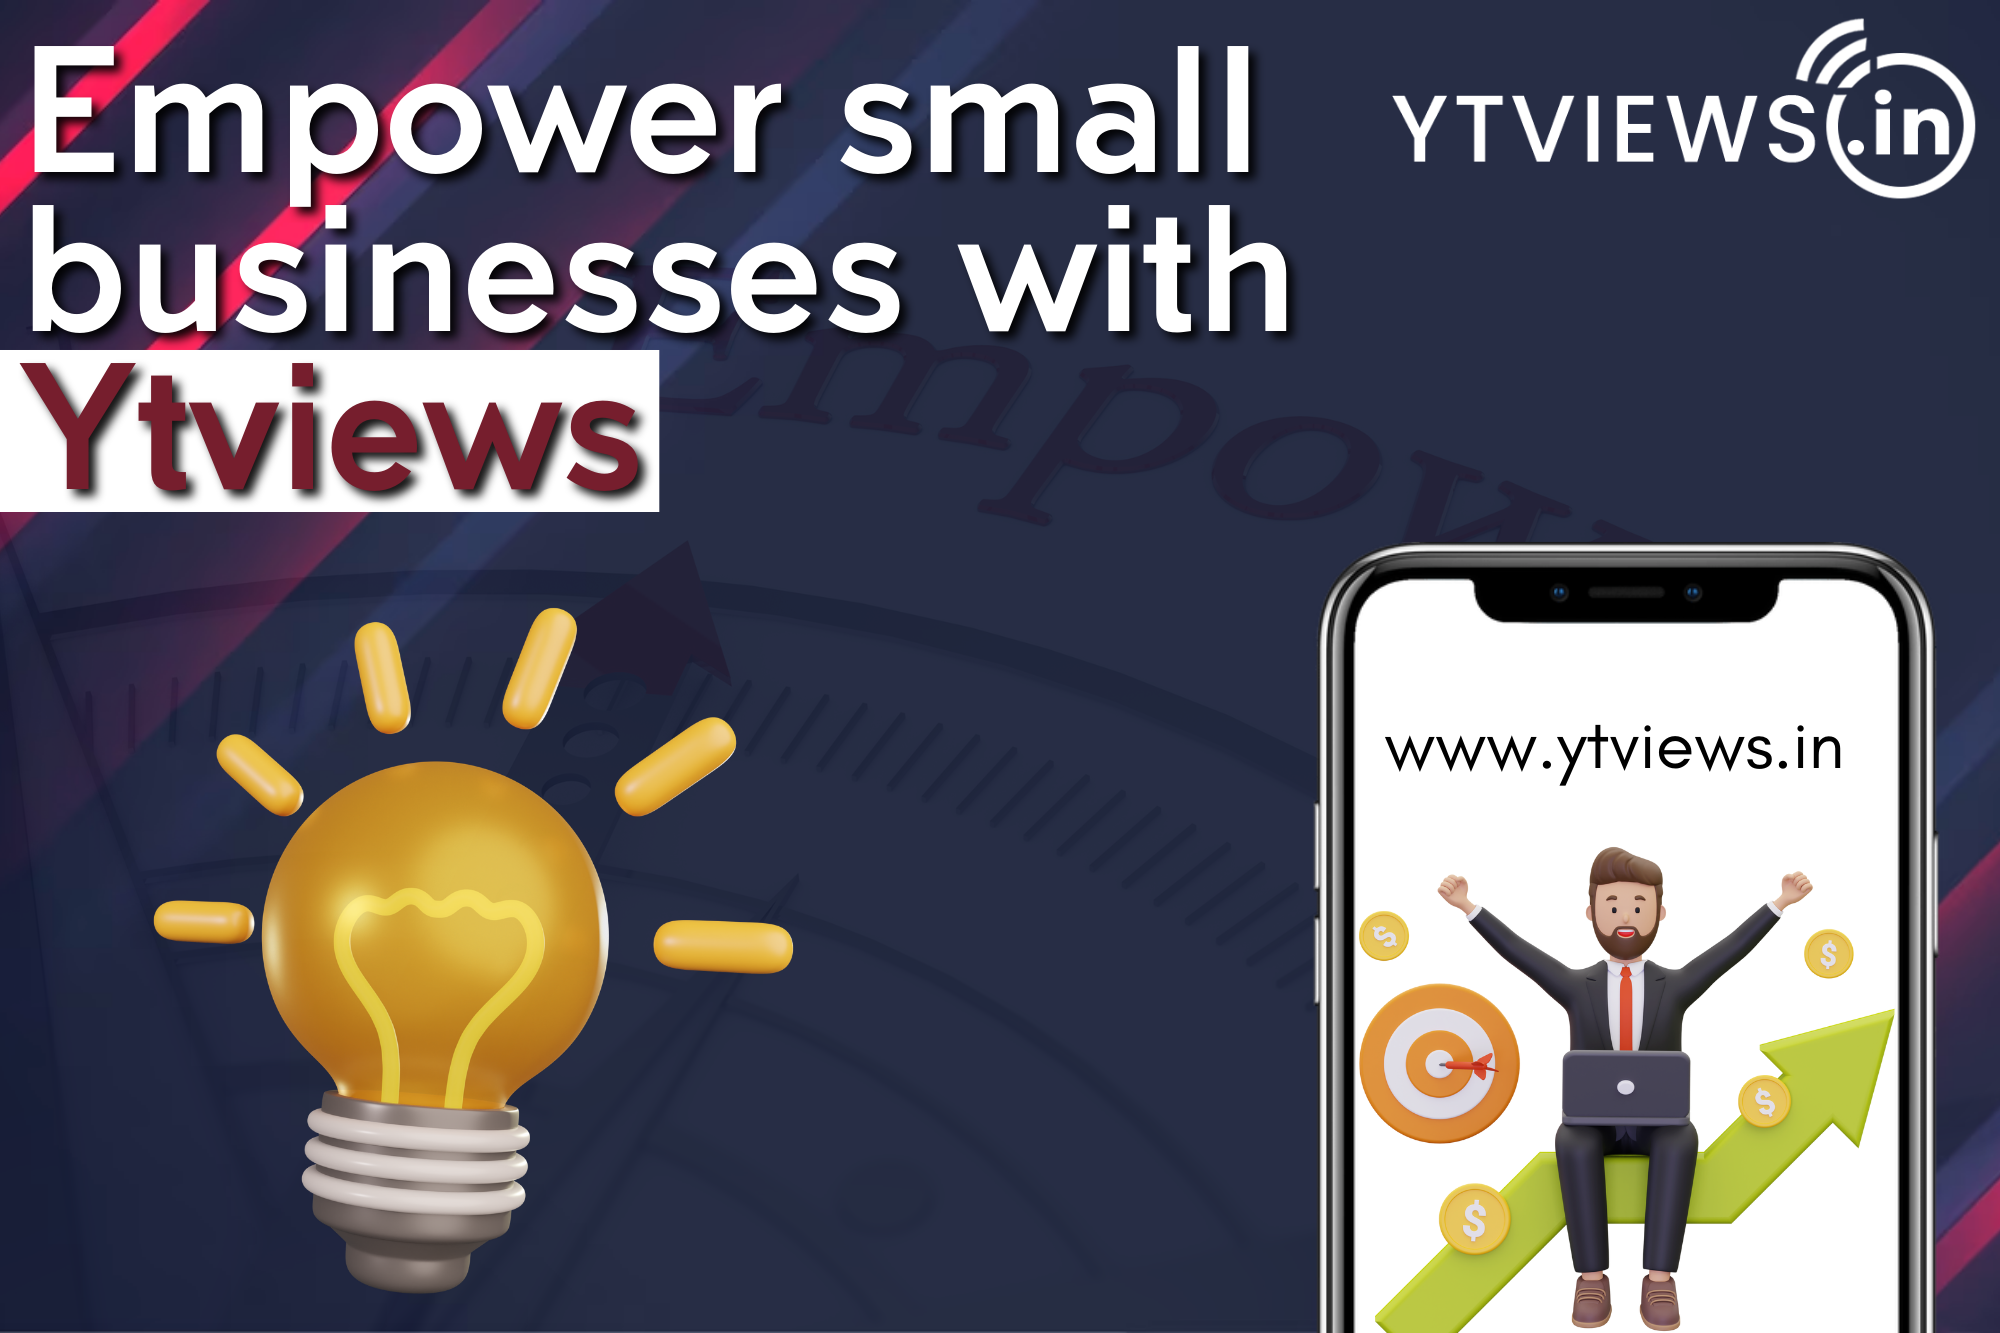 Empowering small businesses for a high rate of marketing success through Ytviews